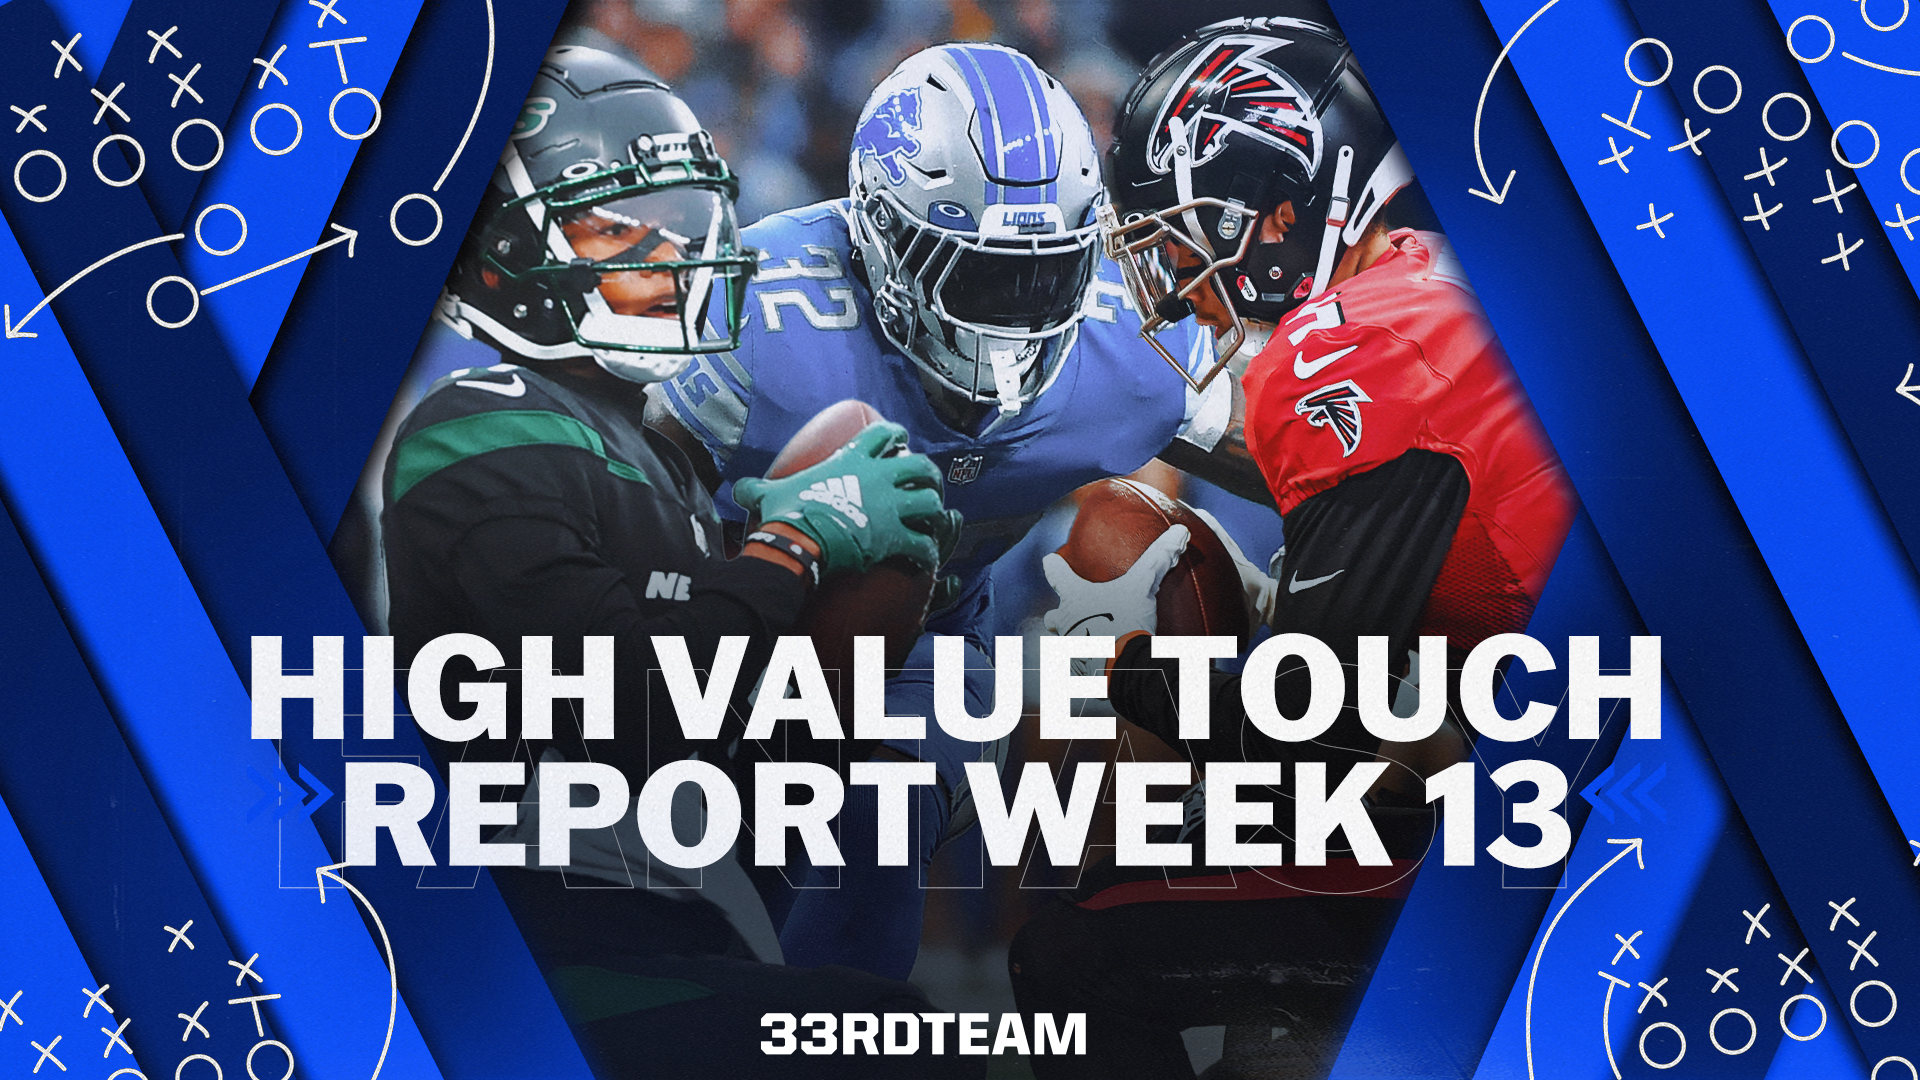 High-Value Touch Report: NFL Week 13 Fantasy Football Rushing, Receiving Data